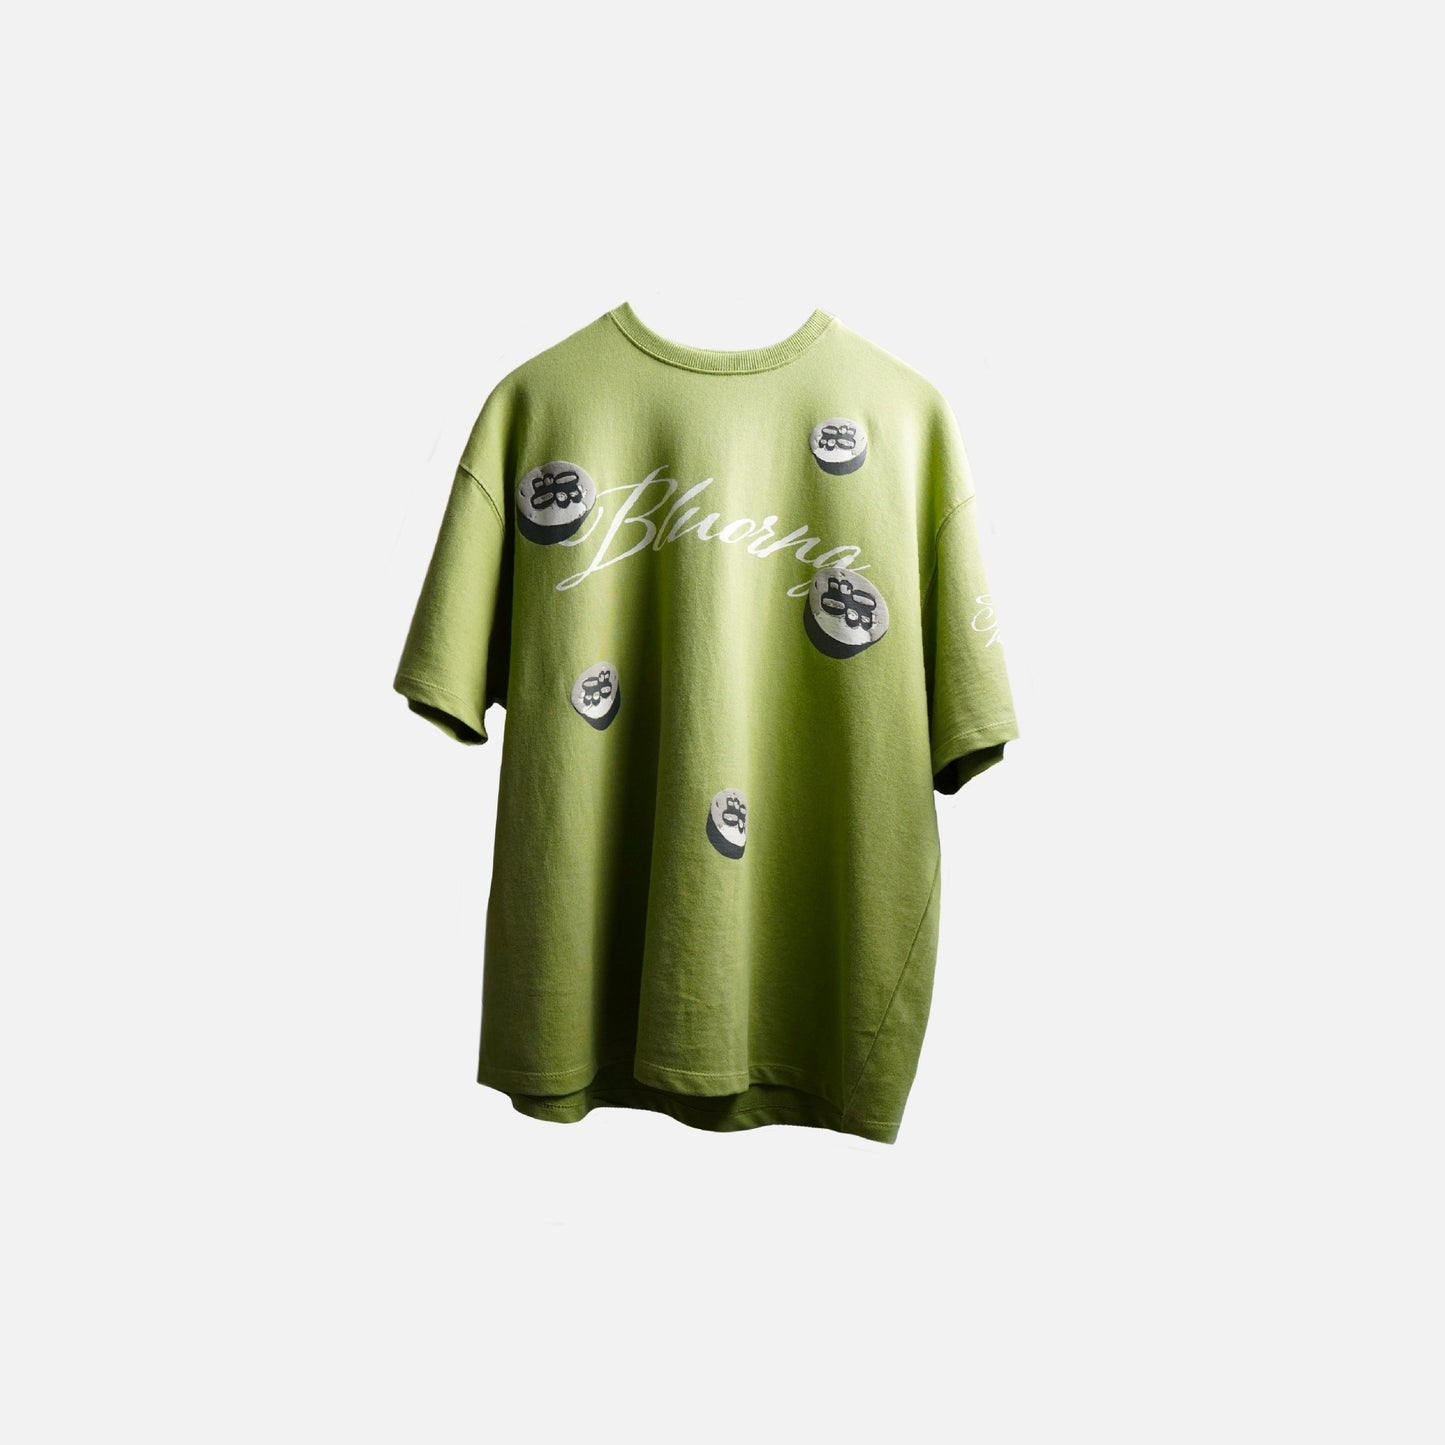 GREEN RELIC tee - Bluorng